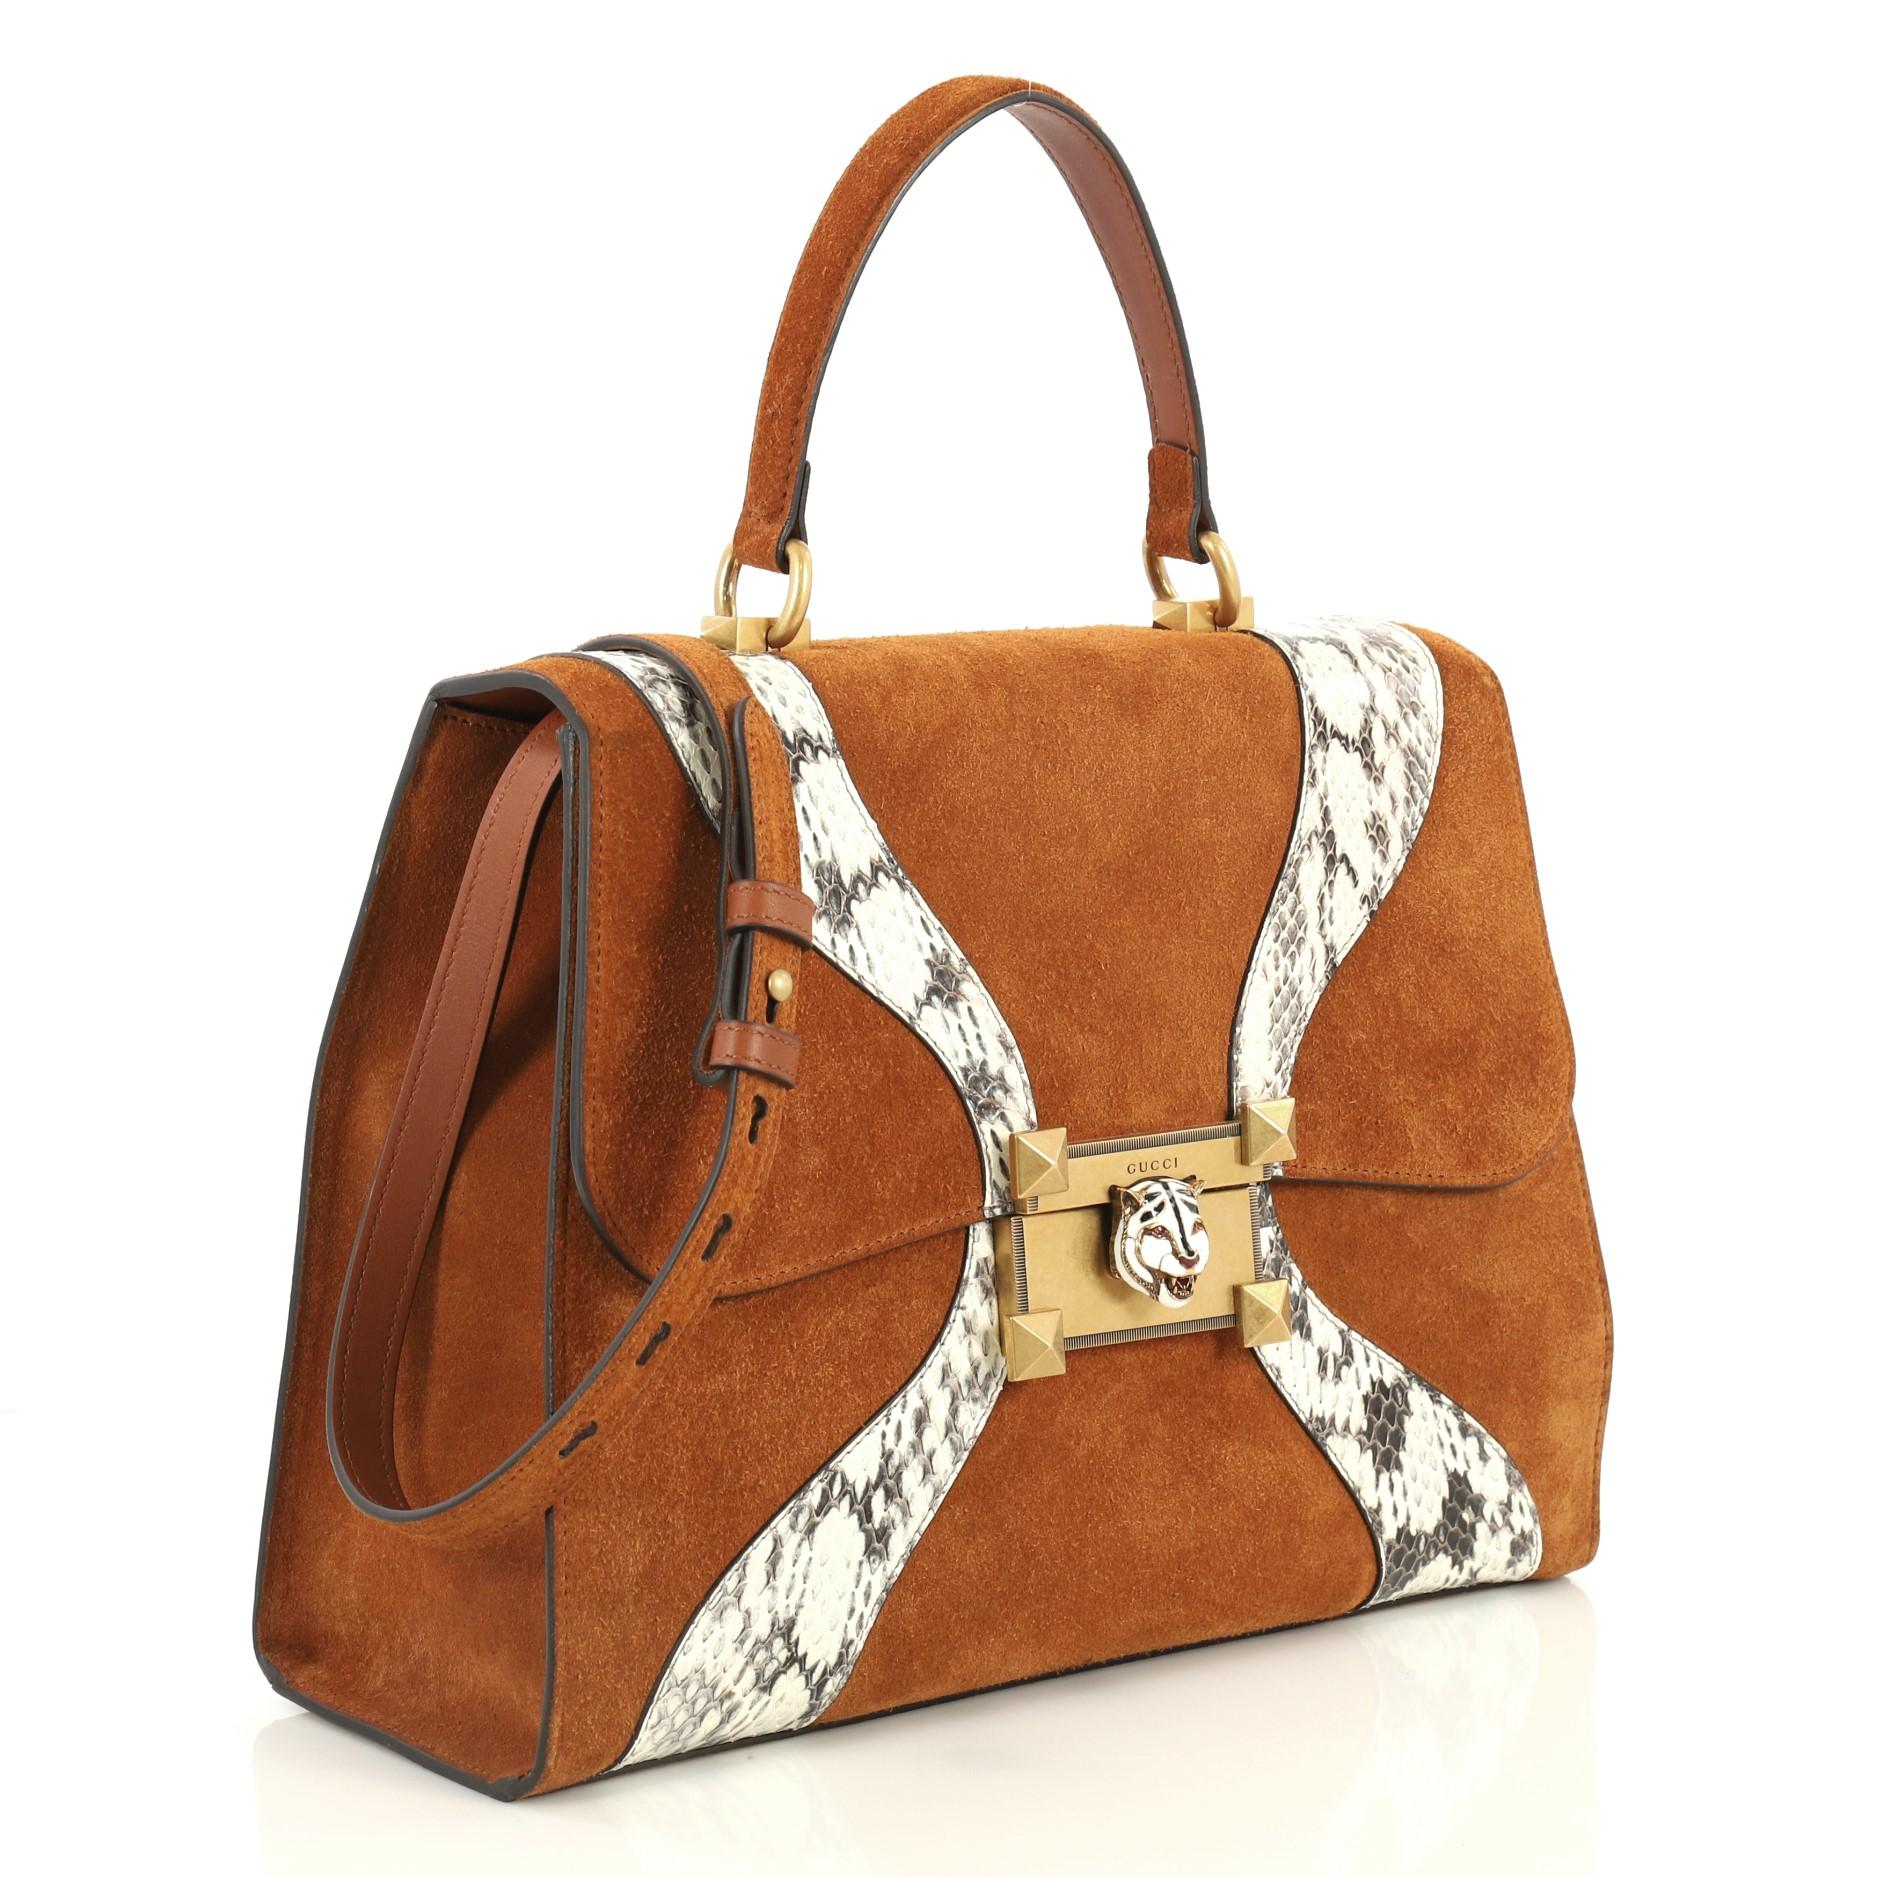 This Gucci Osiride Top Handle Bag Suede with Snakeskin Medium, crafted in brown suede and genuine snakeskin, features a flat top handle, adjusatable shoulder strap, front flap with enameled feline head metal closure and aged gold-tone hardware. It